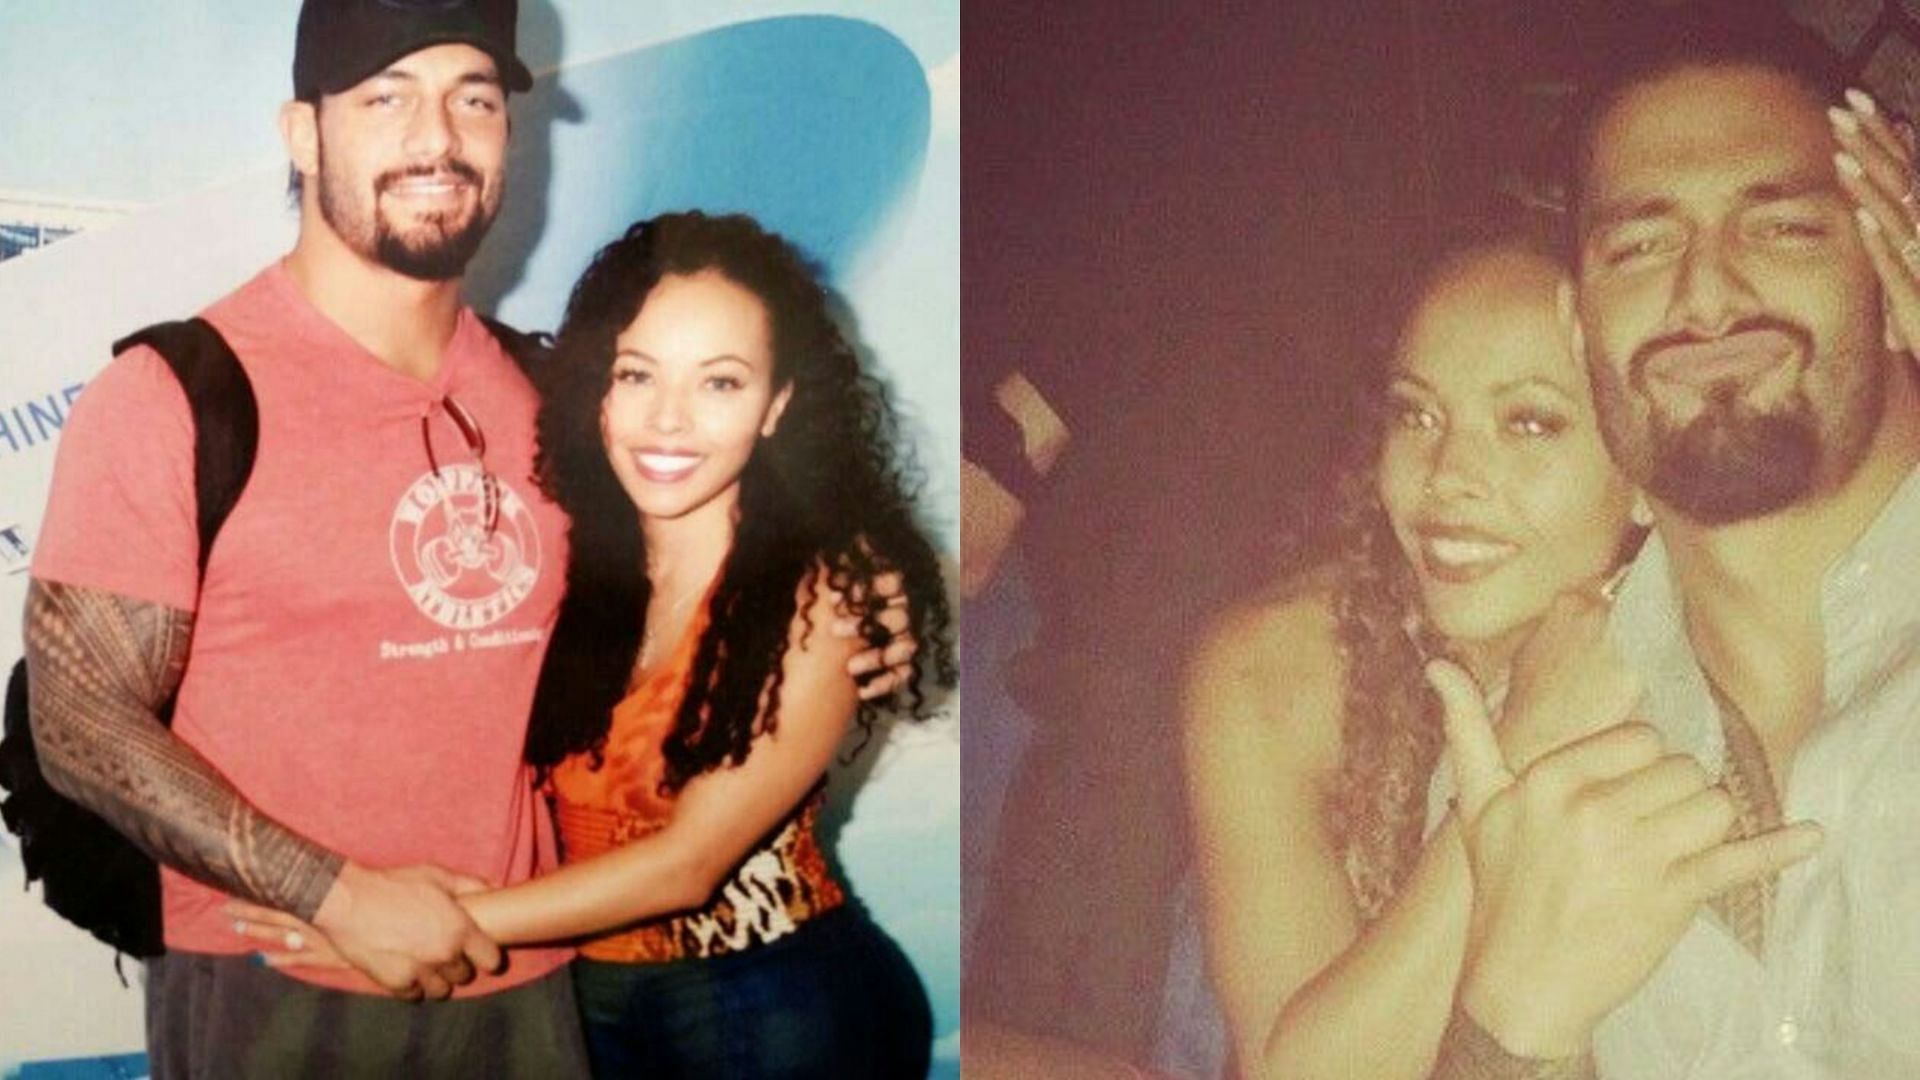 Reigns and Galina Becker started dating in college